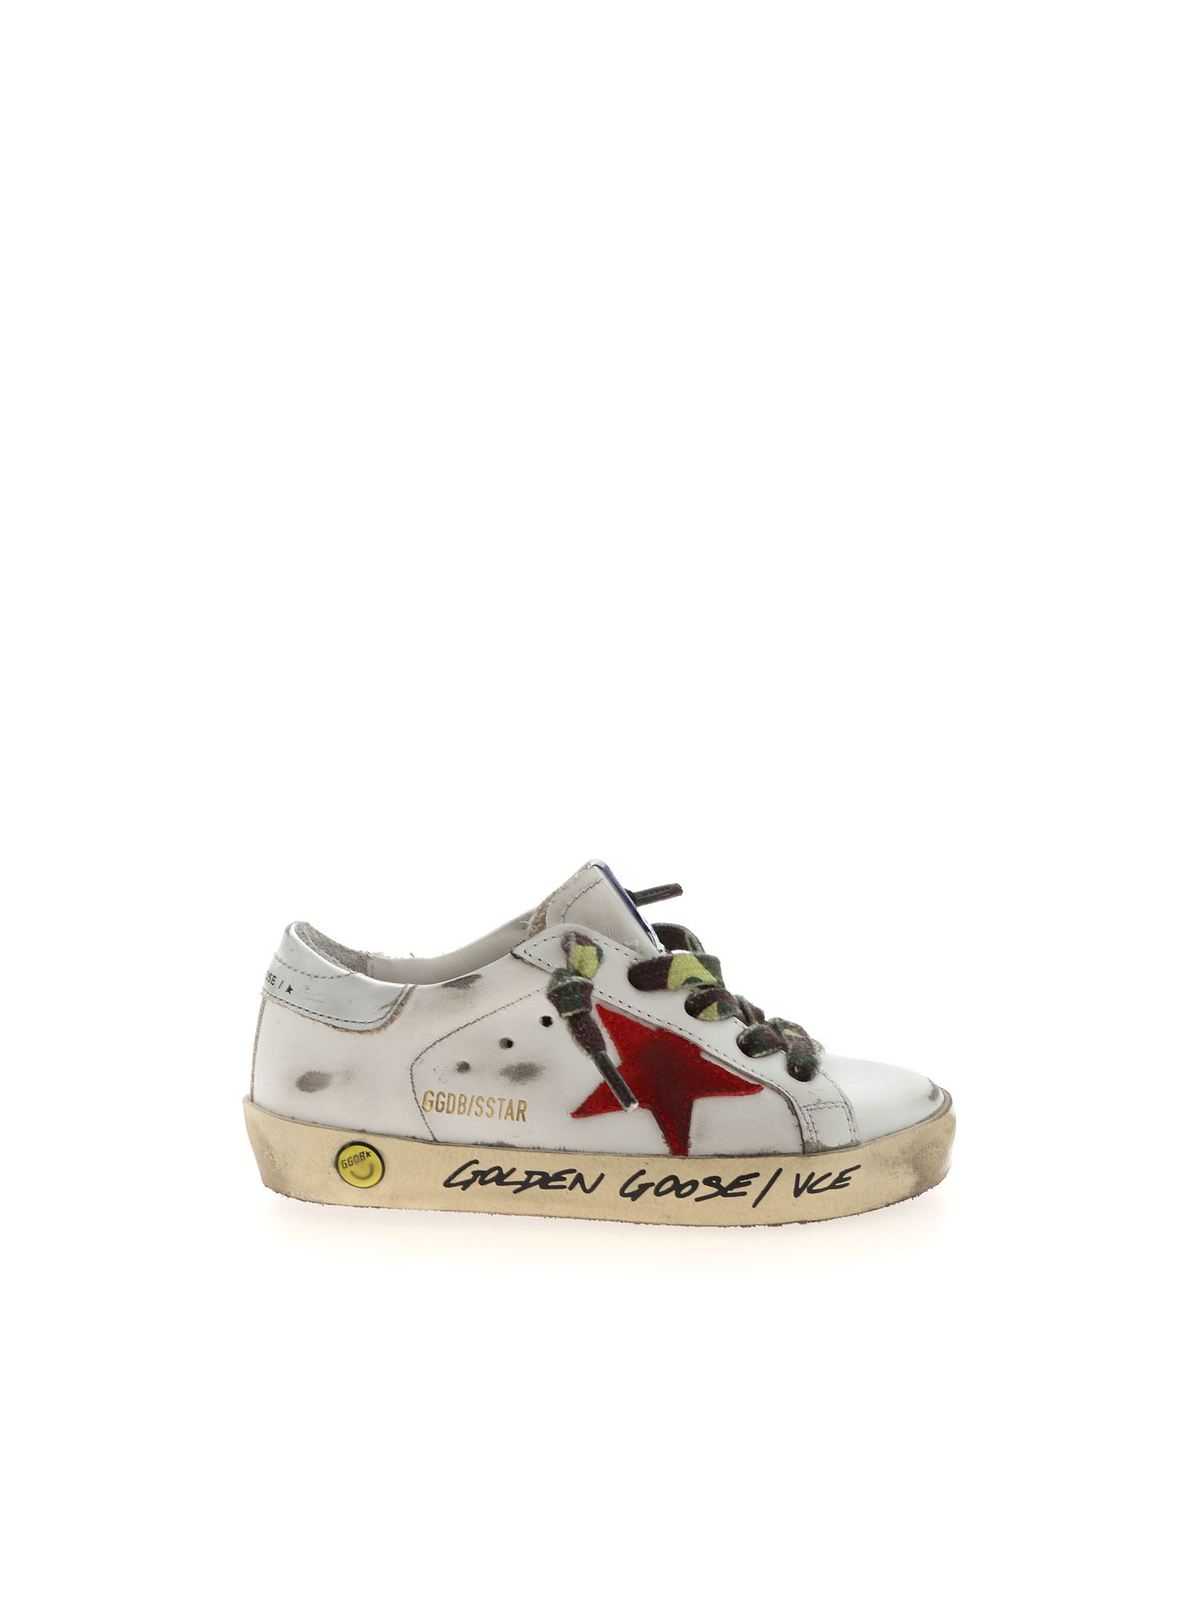 GOLDEN GOOSE SUPER STAR CLASSIC SNEAKERS IN WHITE